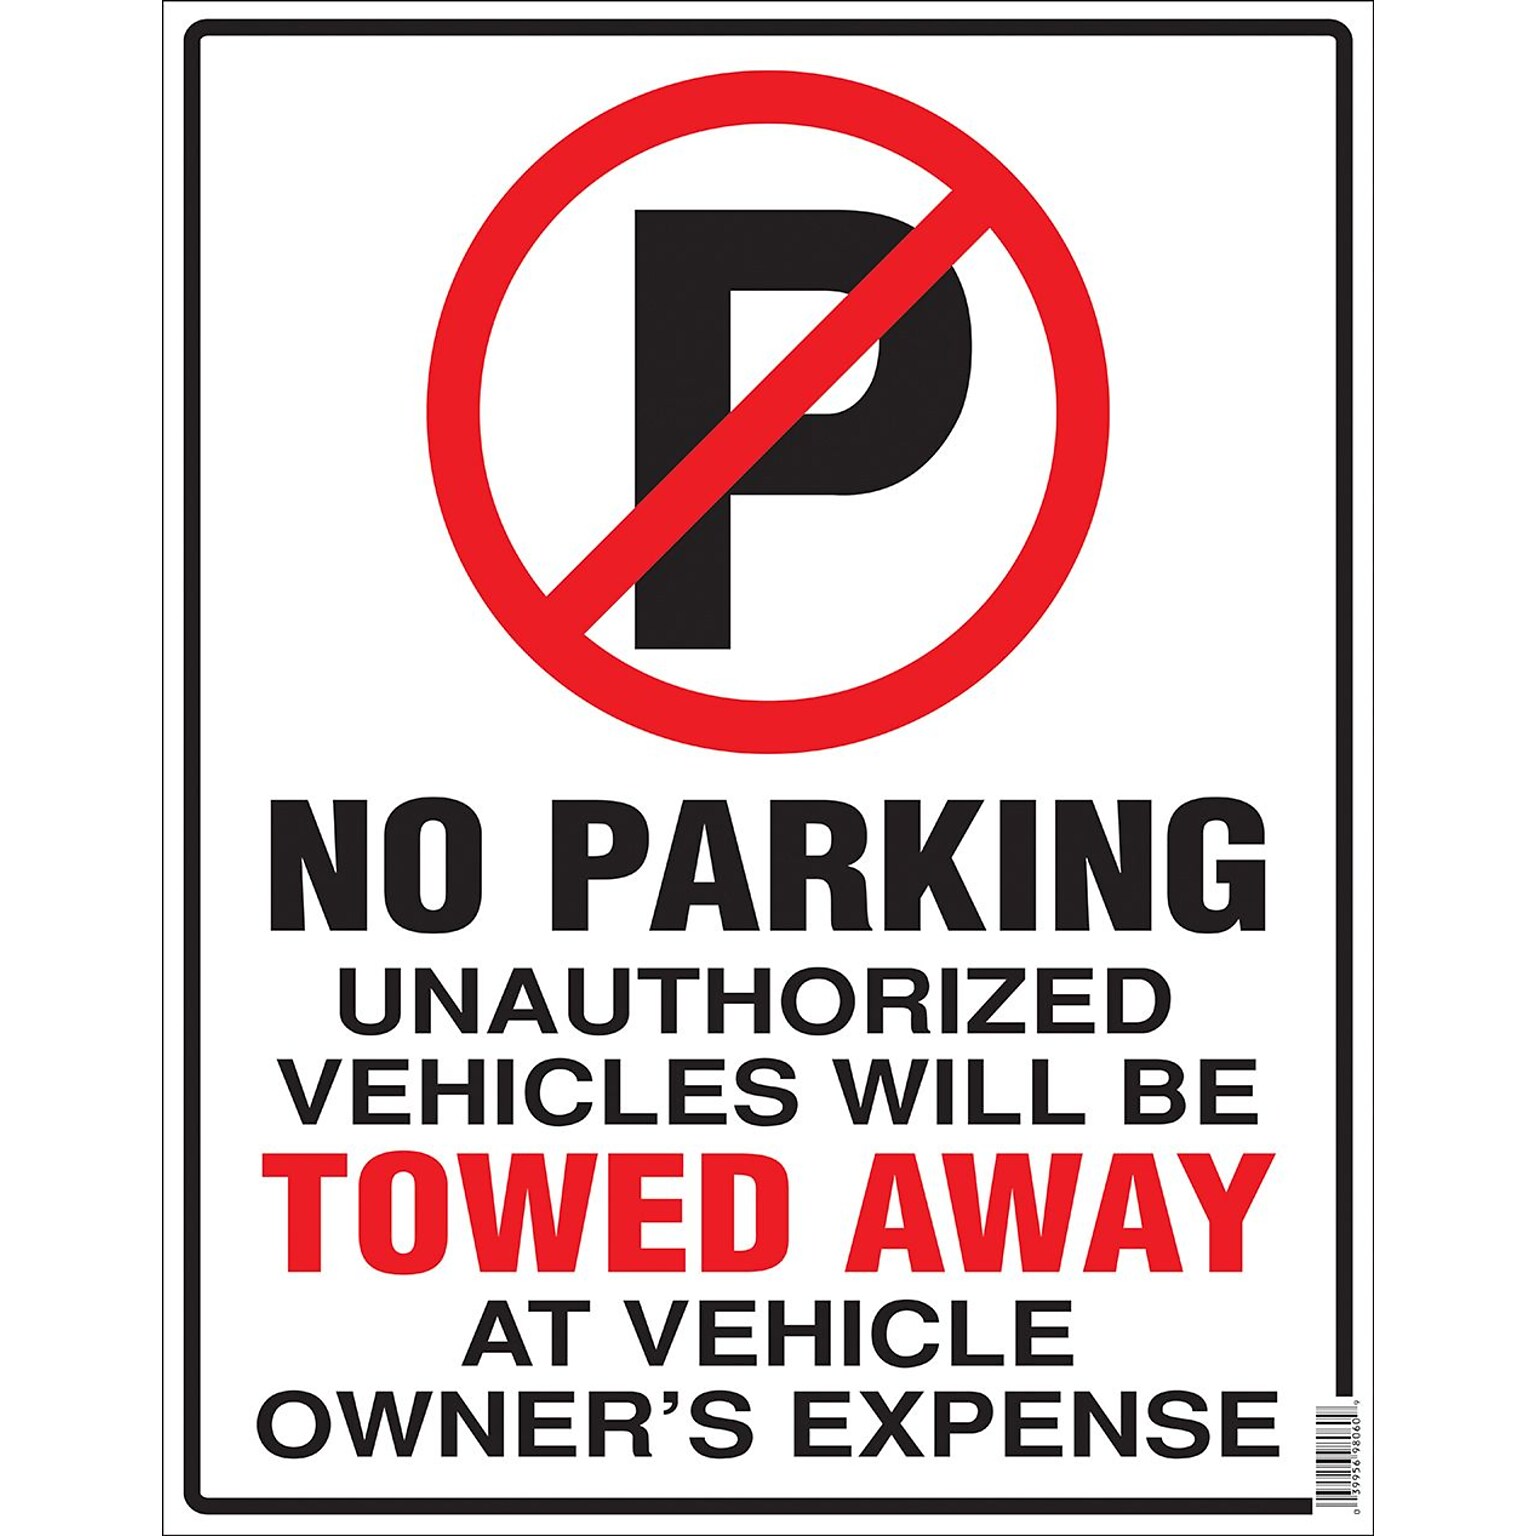 Cosco Sign, No Parking, 19L x 15H, White Sign with Red and Black Text, Set of 3 (098060PK3)